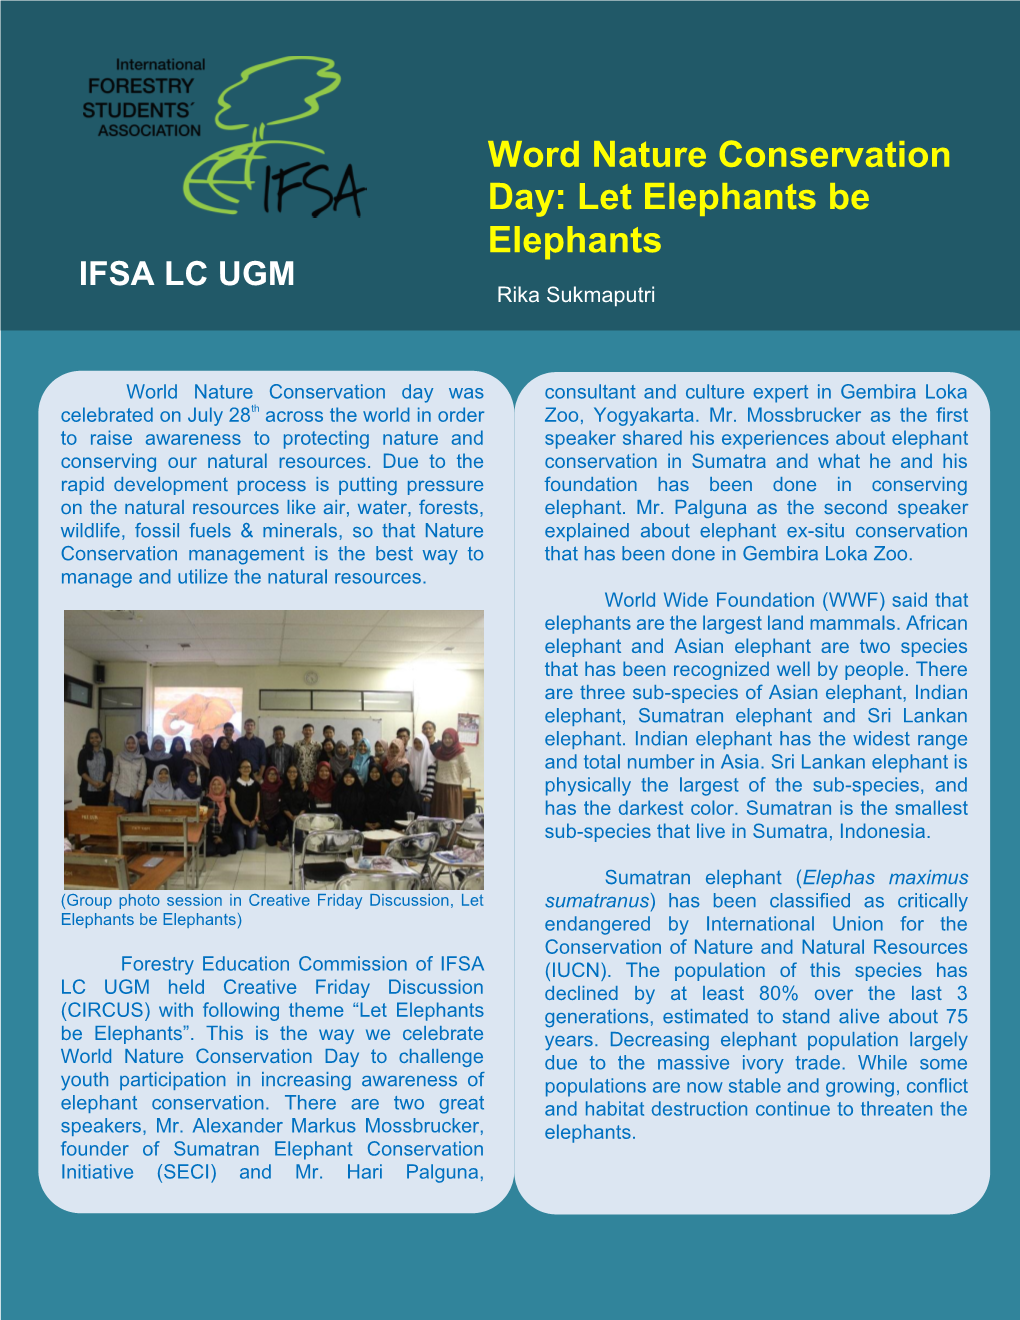 Word Nature Conservation Day: Let Elephants Be Elephants